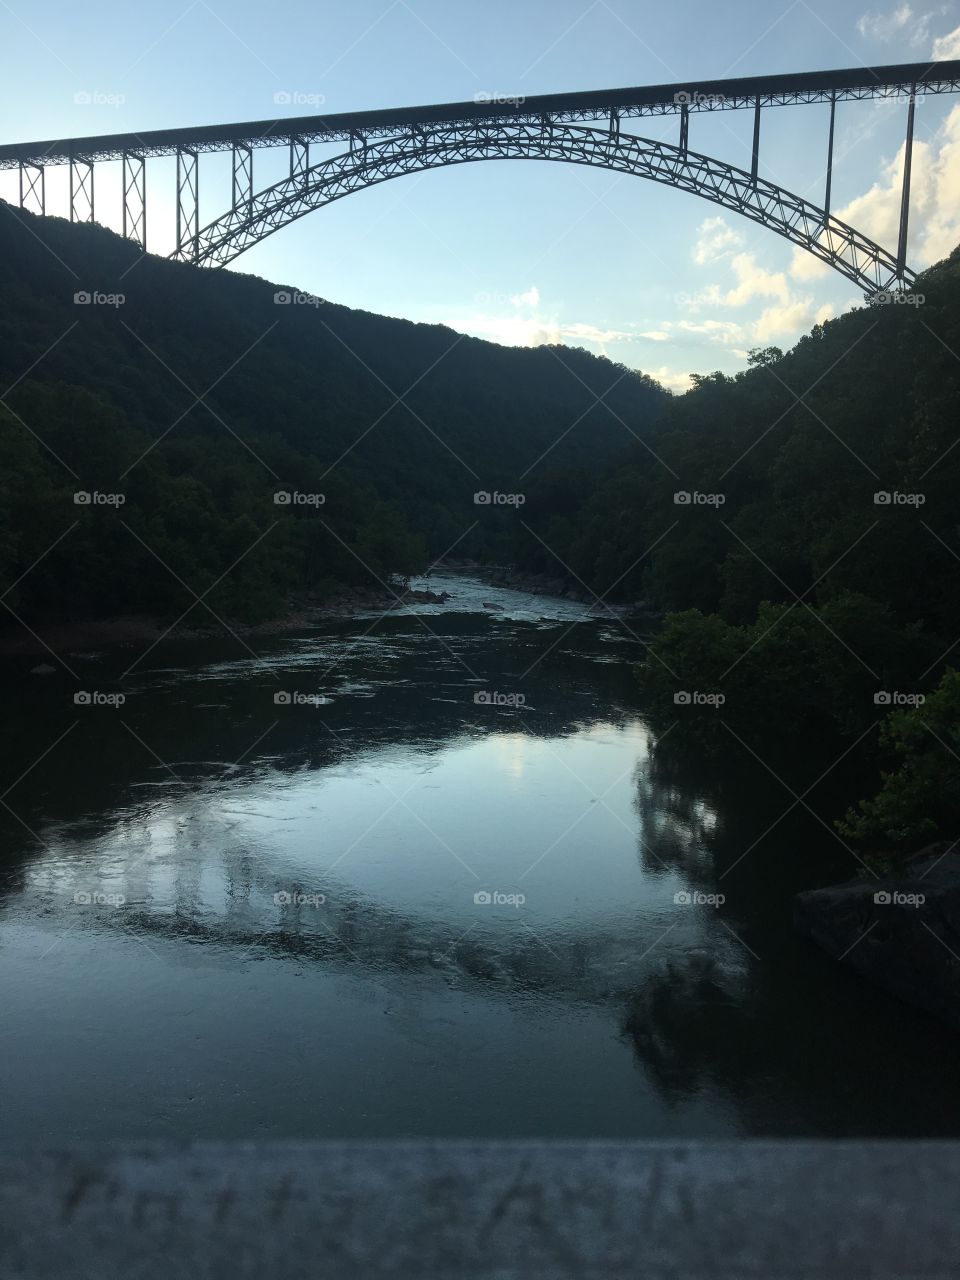 New river Gorge 